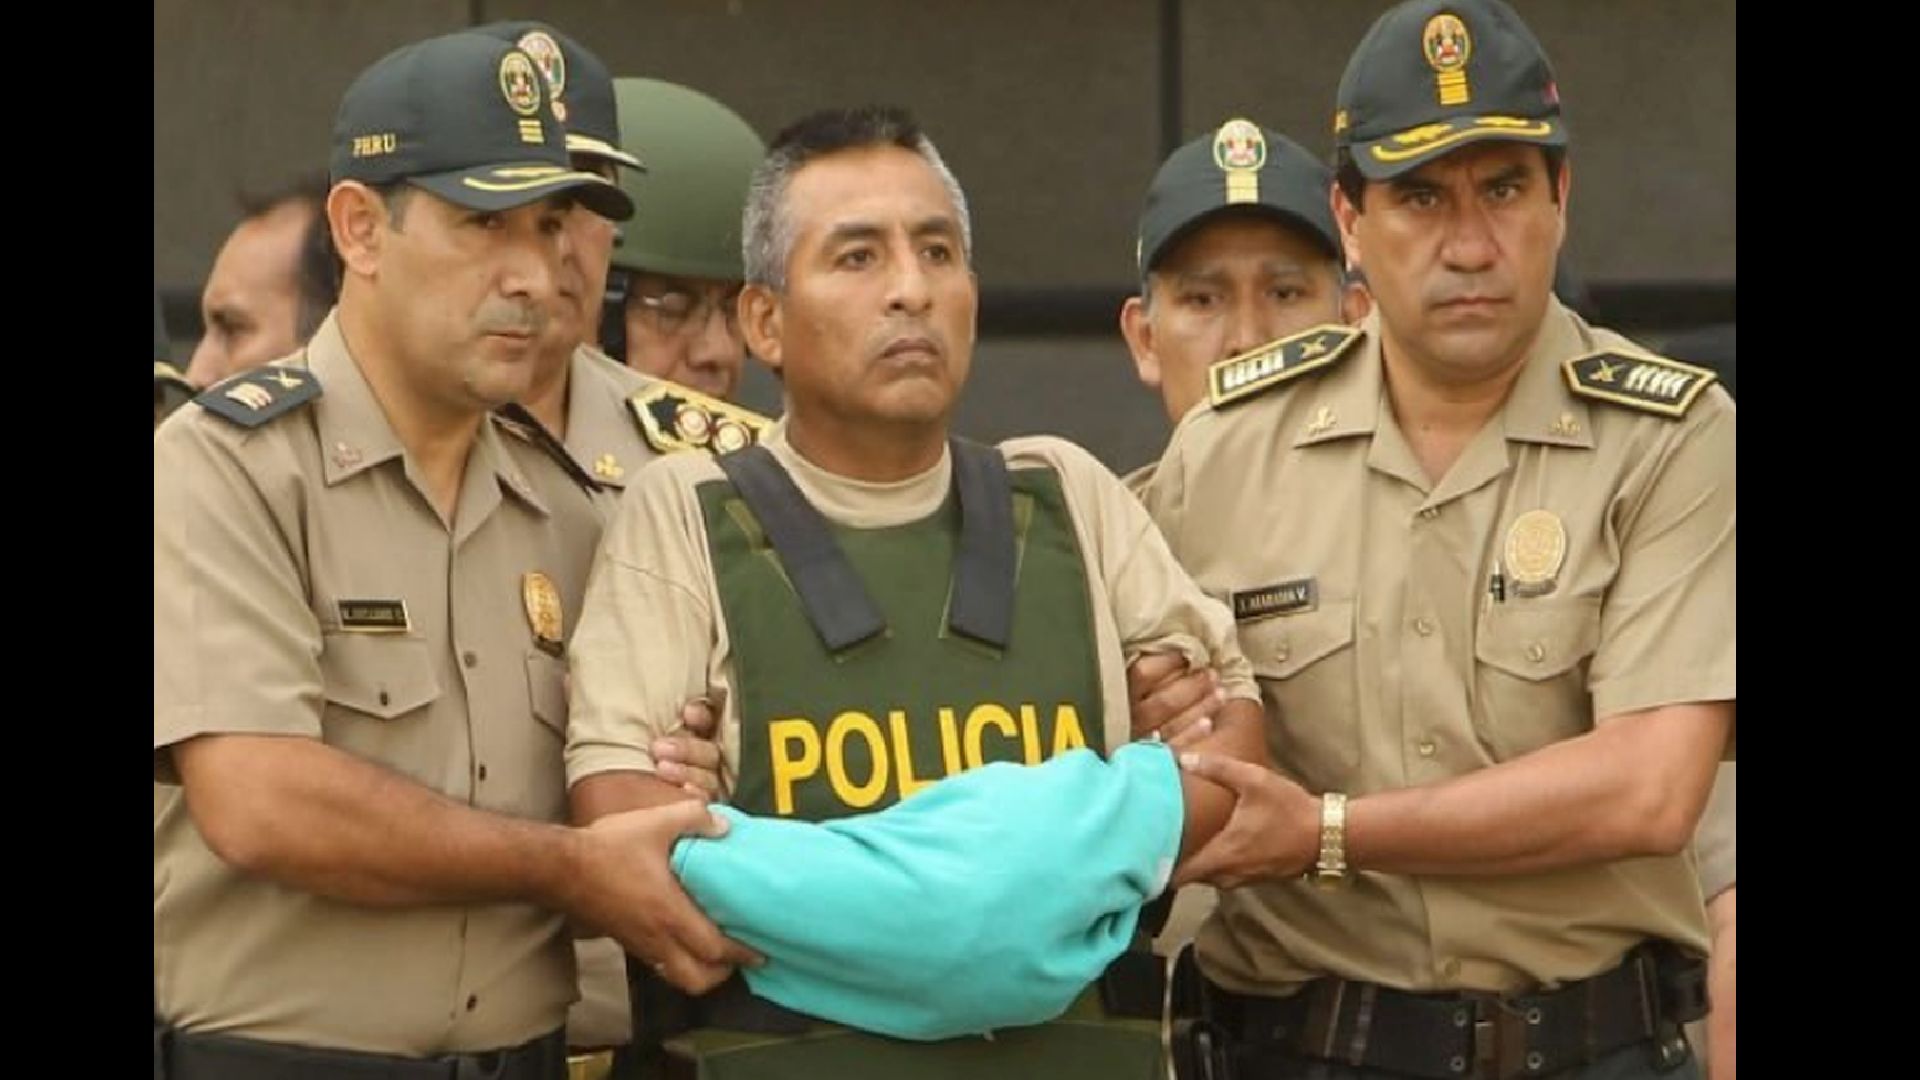 The former chief of Sendero Luminoso, 'Comrade Artemio', was captured in 2012 and is serving a life sentence (Andina)